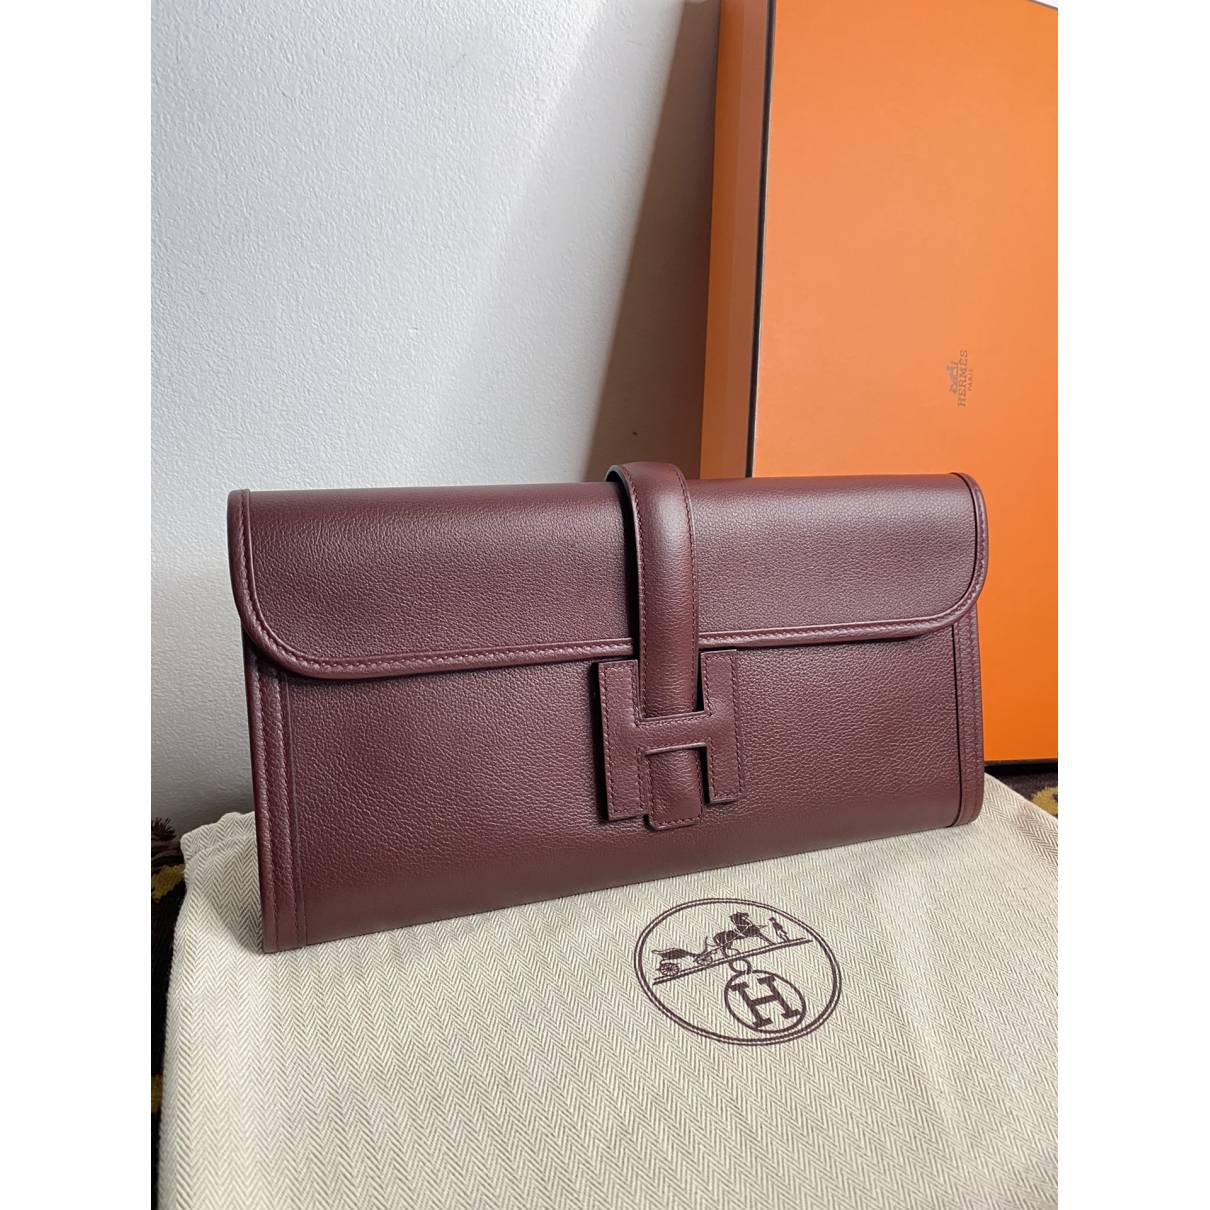 Hermès - Authenticated Jige Clutch Bag - Leather Burgundy for Women, Very Good Condition